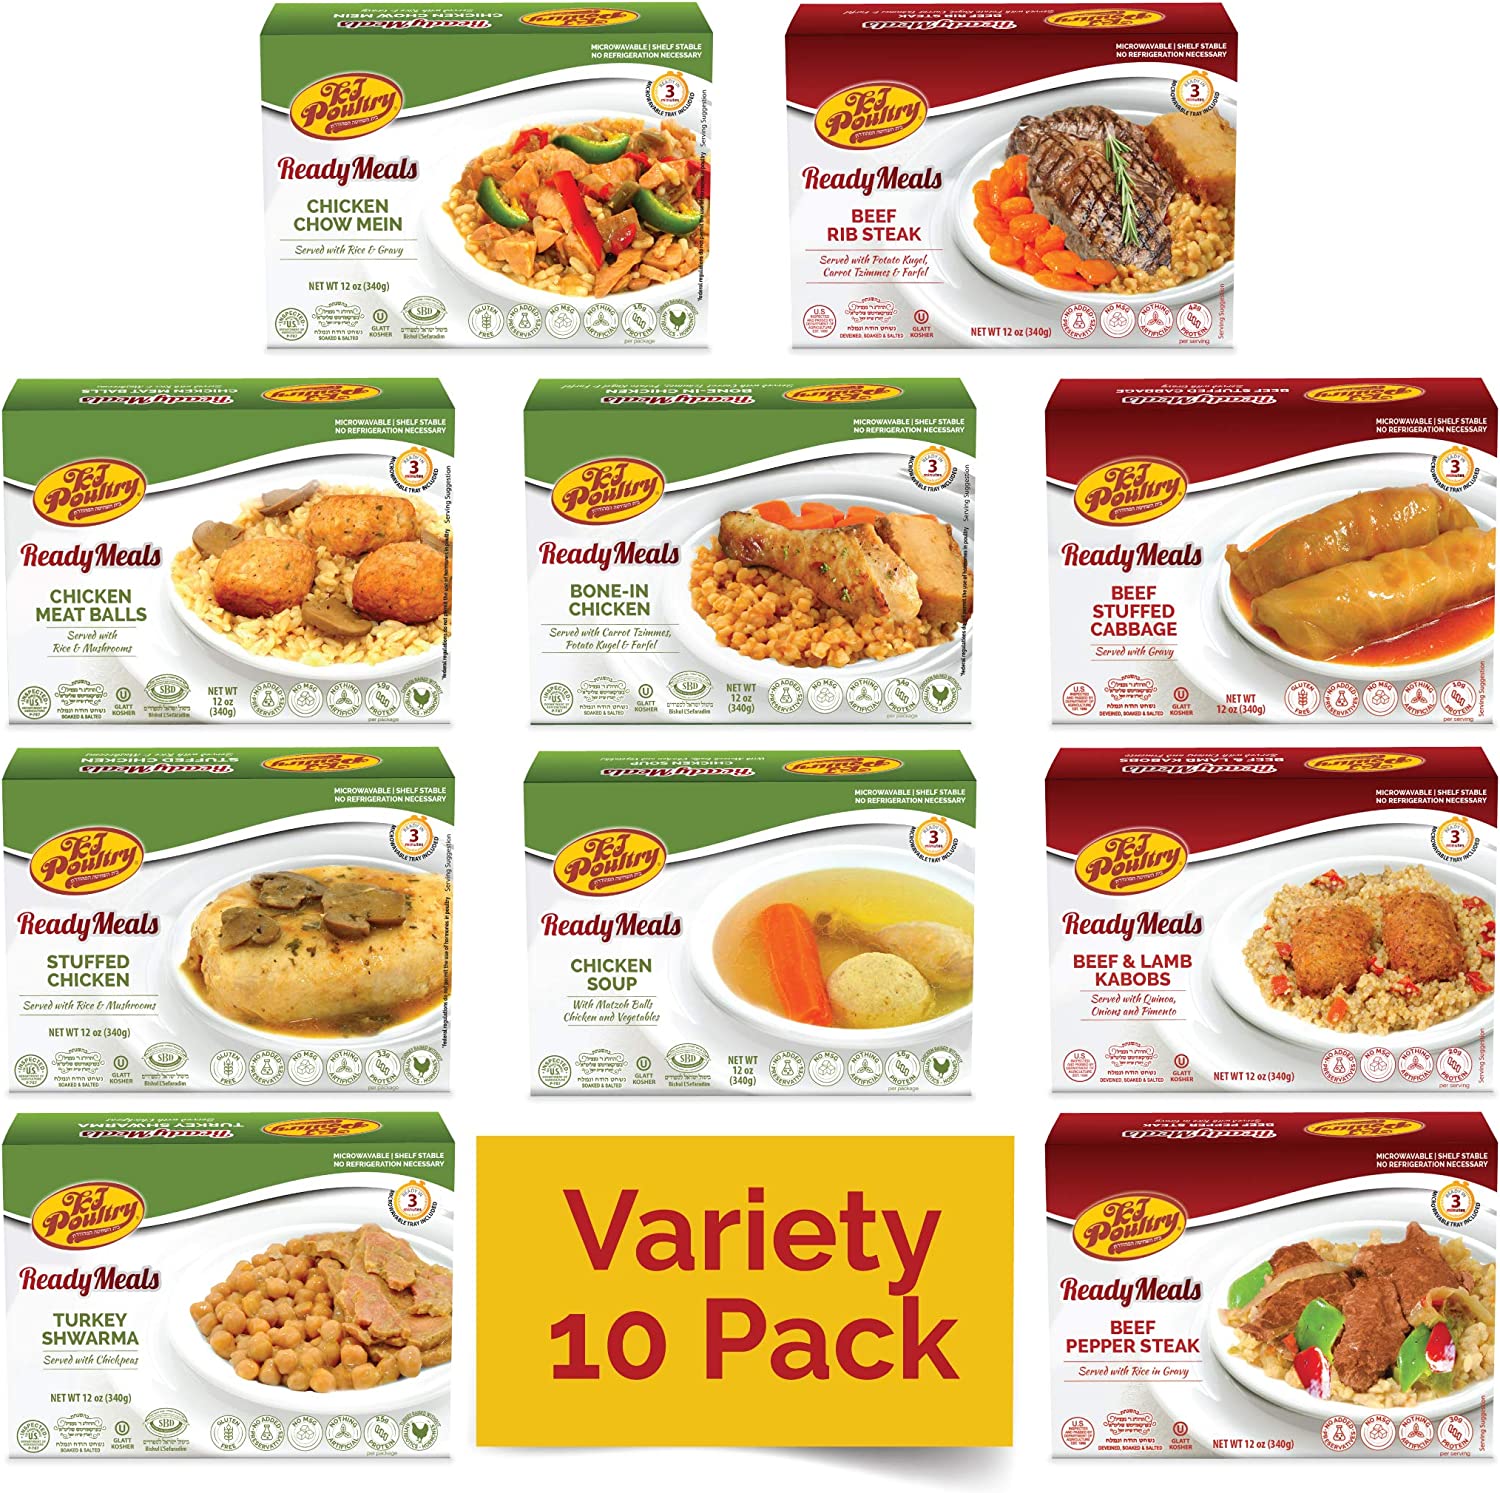 Kosher MRE Meat Meals Ready to Eat (10 Pack Variety – Beef, Chicken & Turkey) Prepared Entree Fully Cooked, Shelf Stable Microwave Dinner – Travel, Military, Camping, Emergency Survival Protein Food